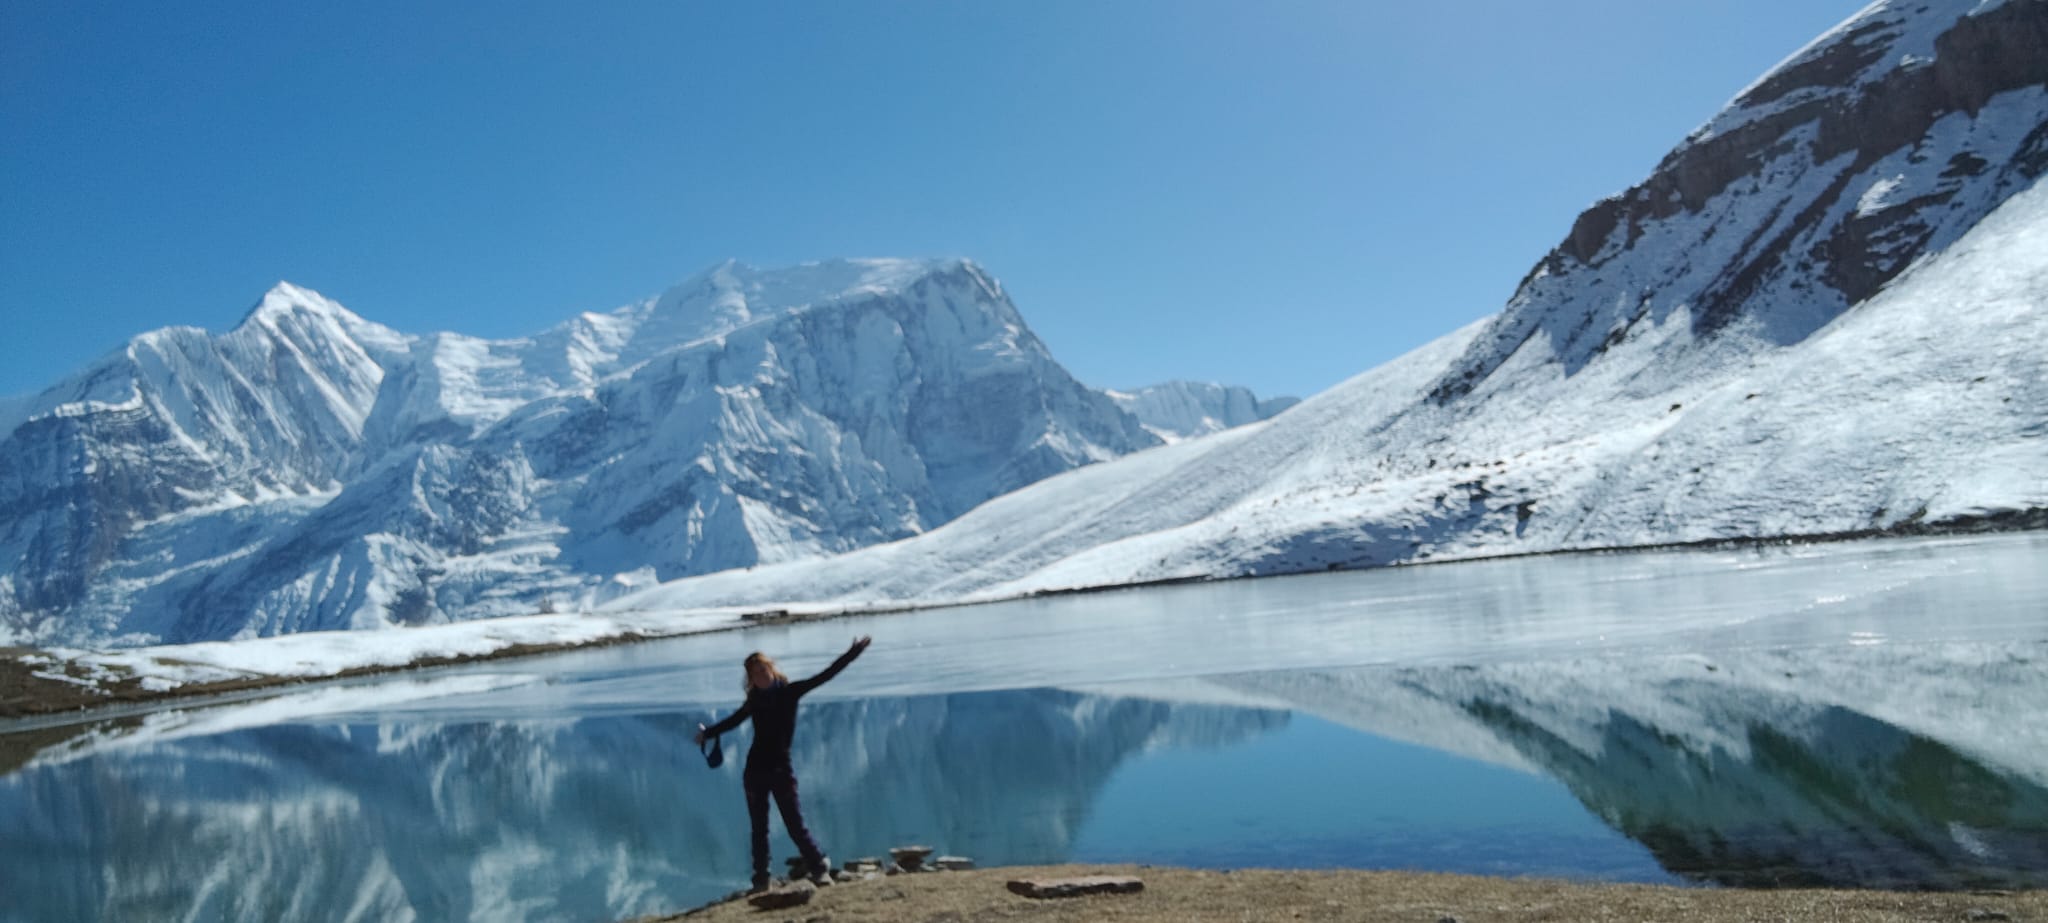 Tilicho Lake: A Complete Guide to Discovering the Beauty of the Annapurna Region